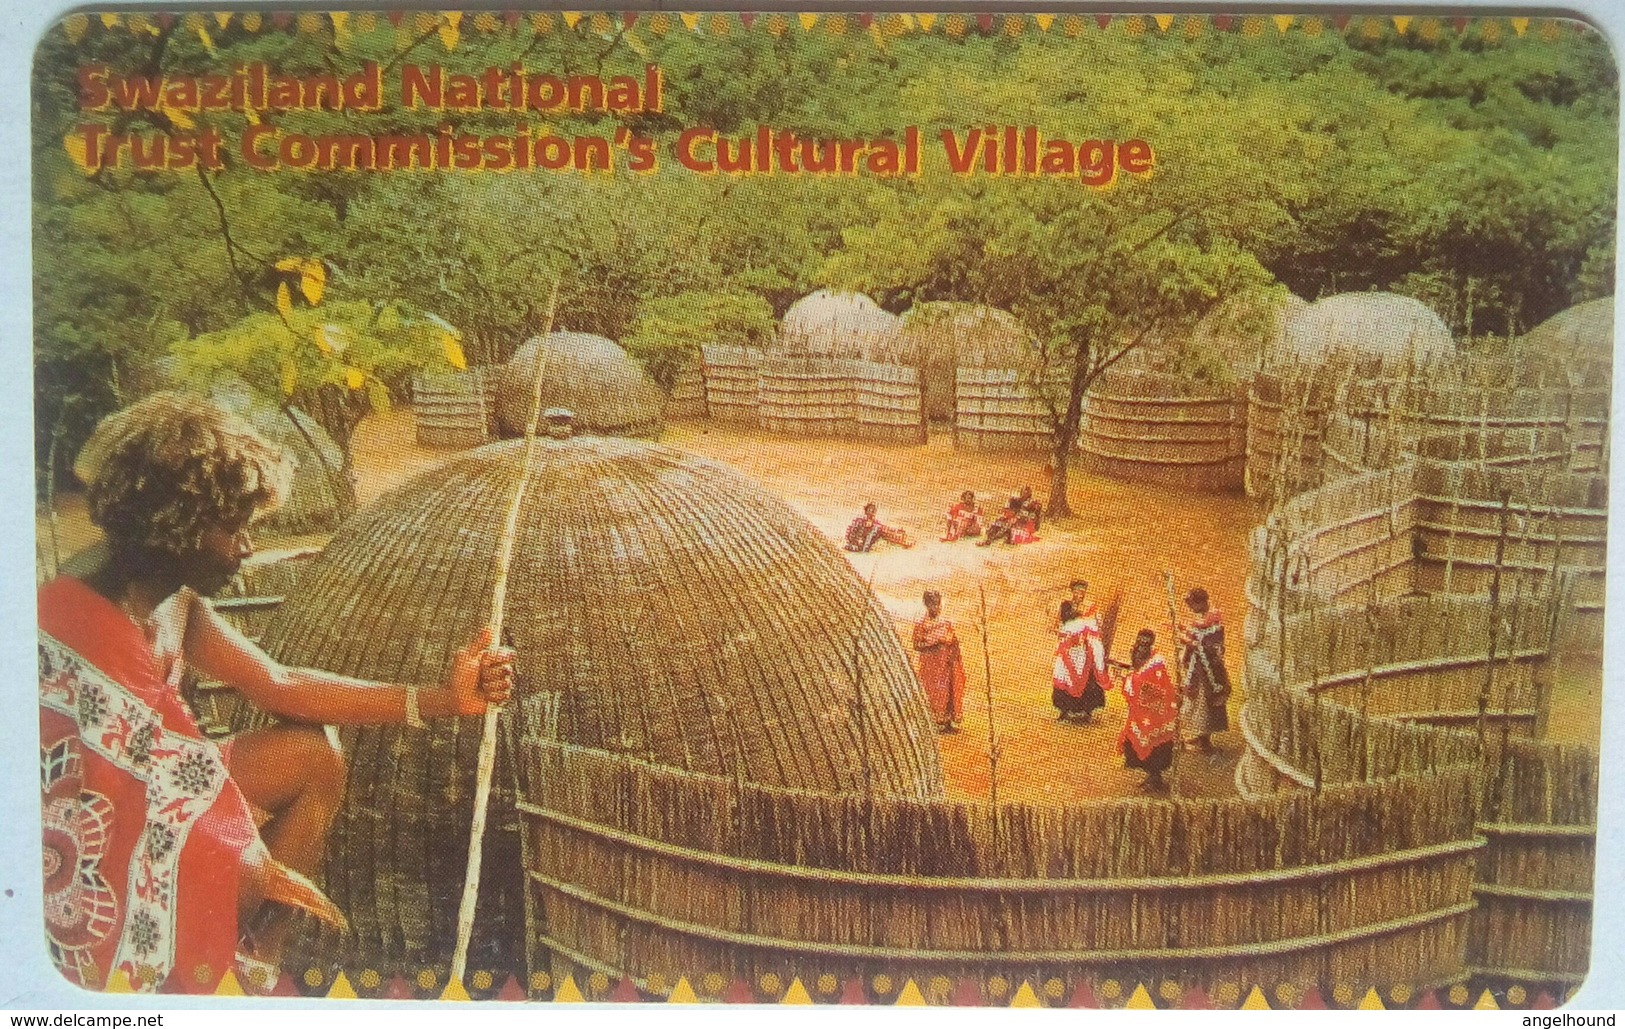 Swaziland National Trust Commision And Cultural Village - Swasiland